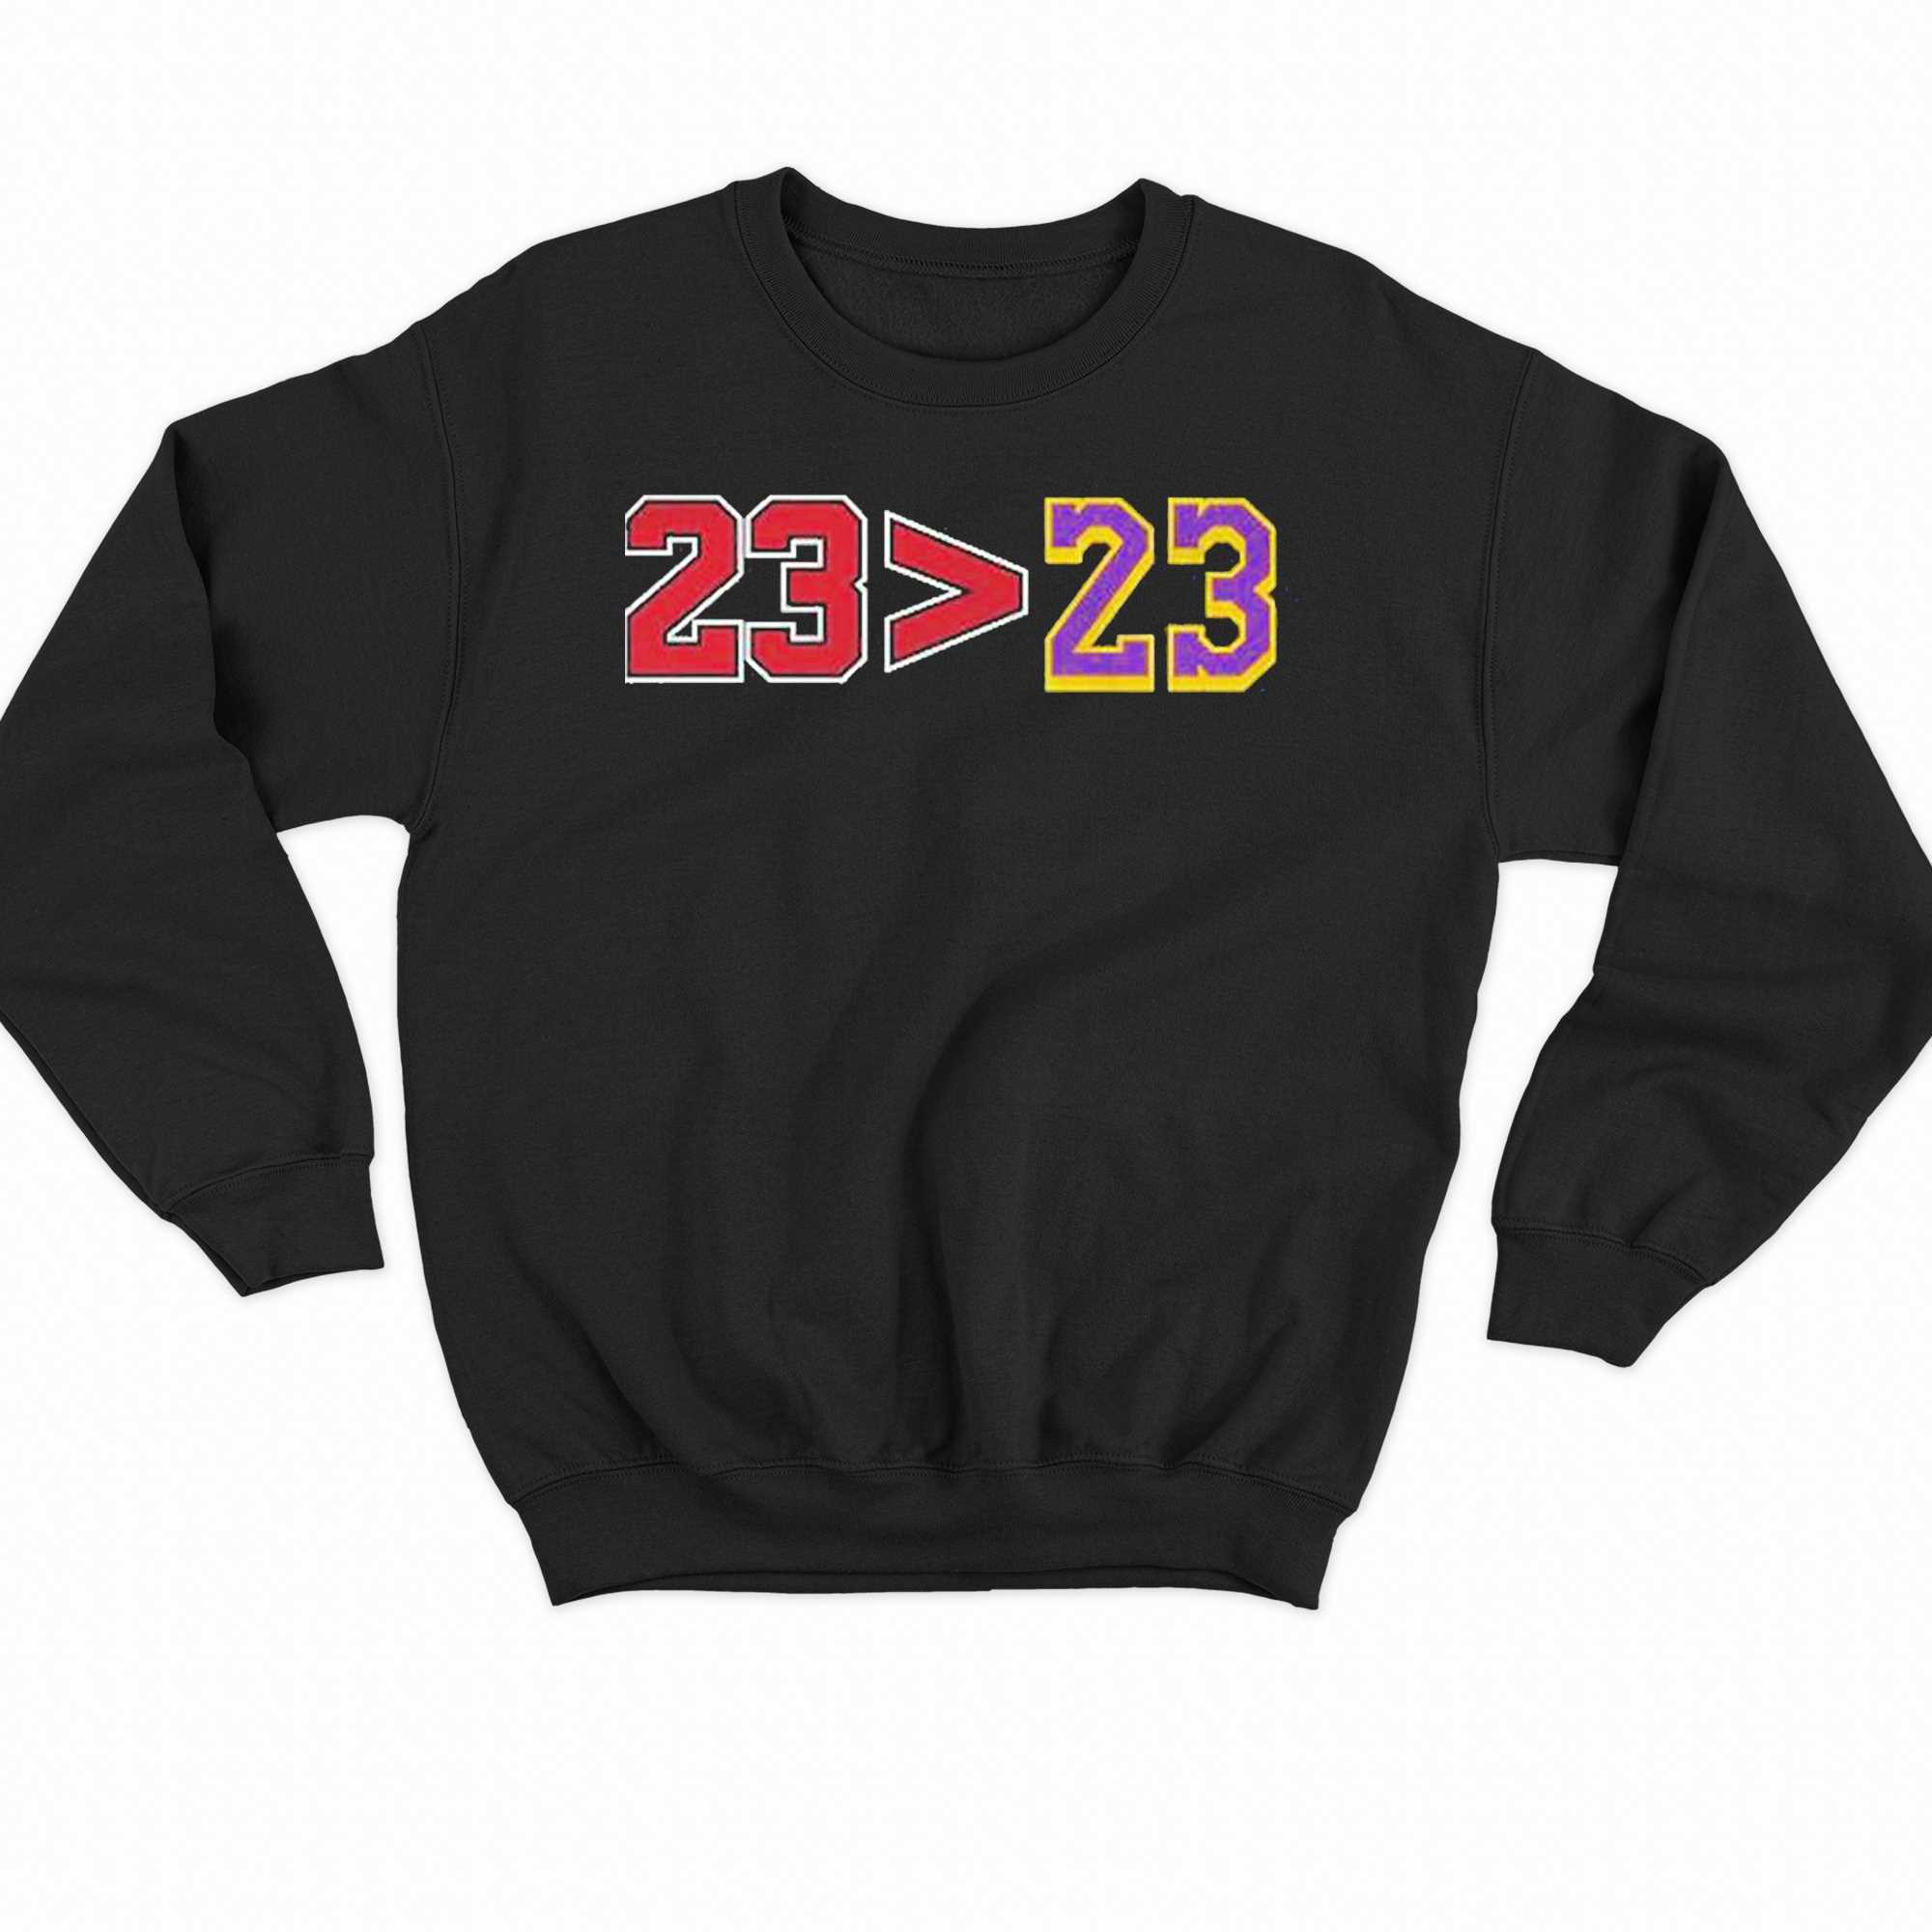 Chicago Greater Than 23-23 Tee Shirt 